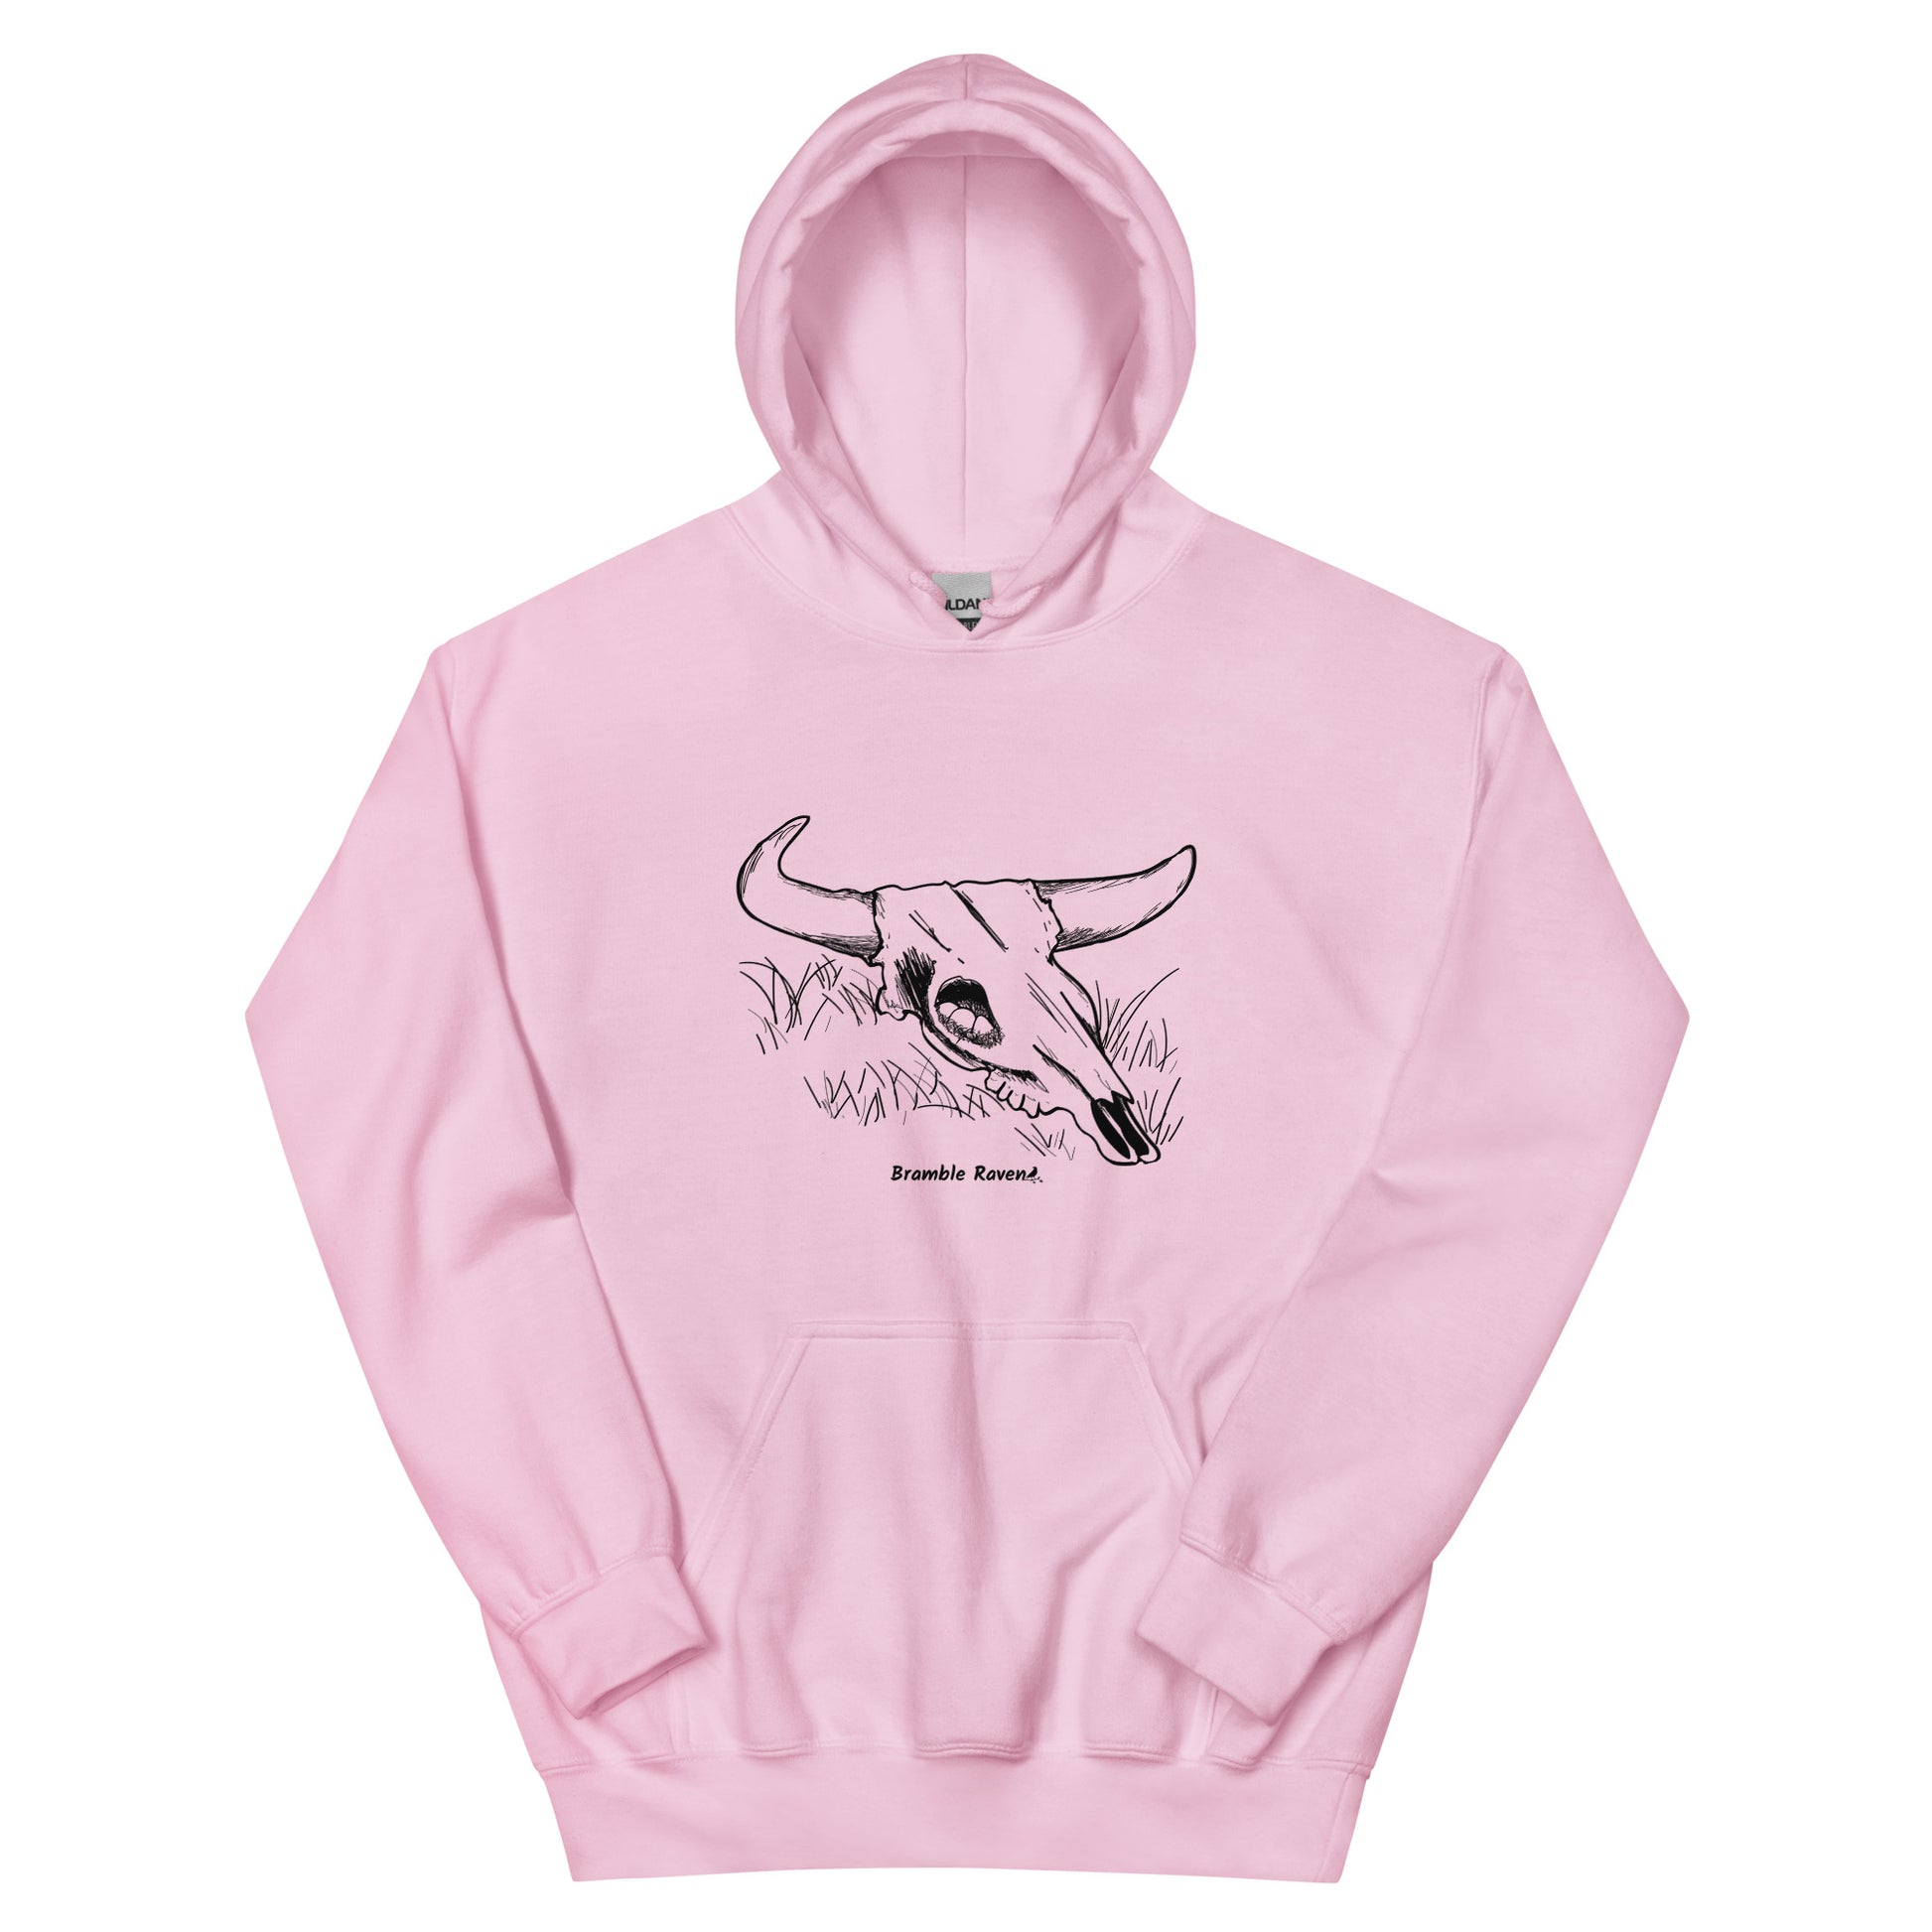 Light pink colored unisex hoodie. Front has image of a cow skull cradling a bird nest. Features double-lined hood and front pouch pocket.